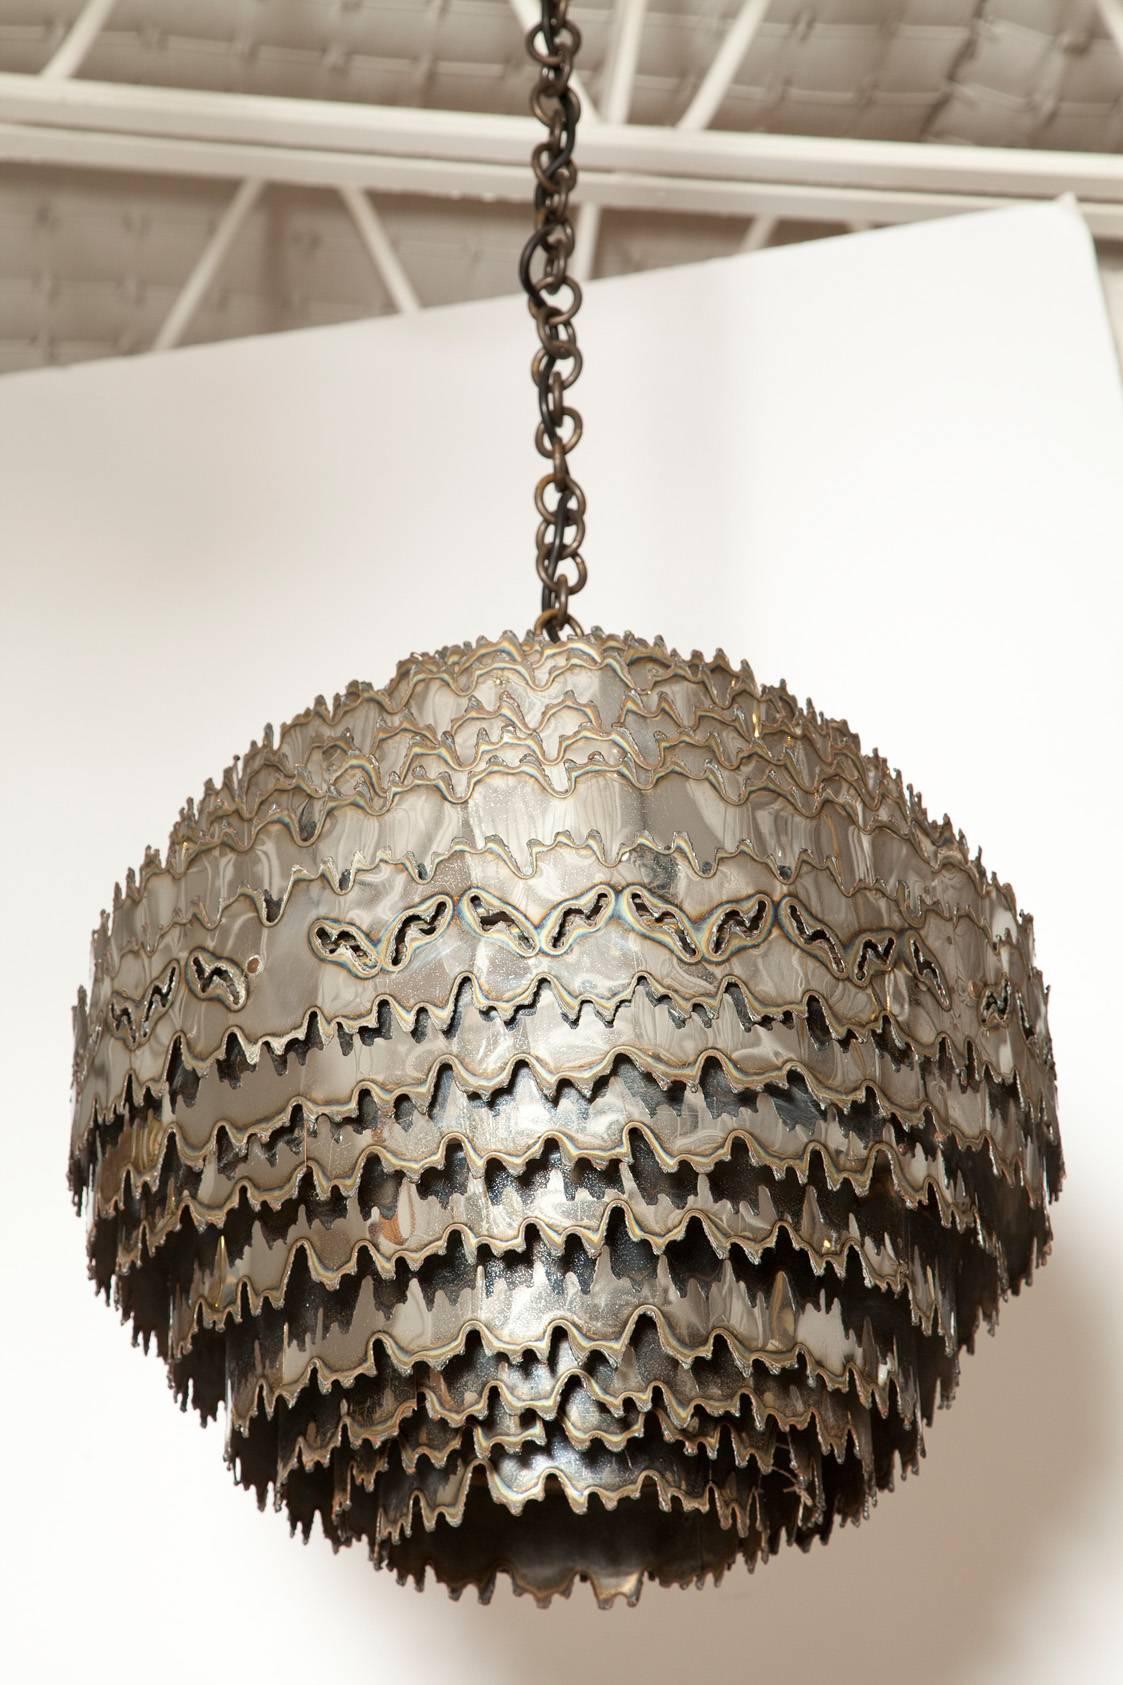 This large 1970s chrome finished, torch cut orb chandelier is one of the finest examples of Tom Greene's work for Feldman Lighting. Re-wired and-polished, with approximately 34 inches of original chain and canopy.